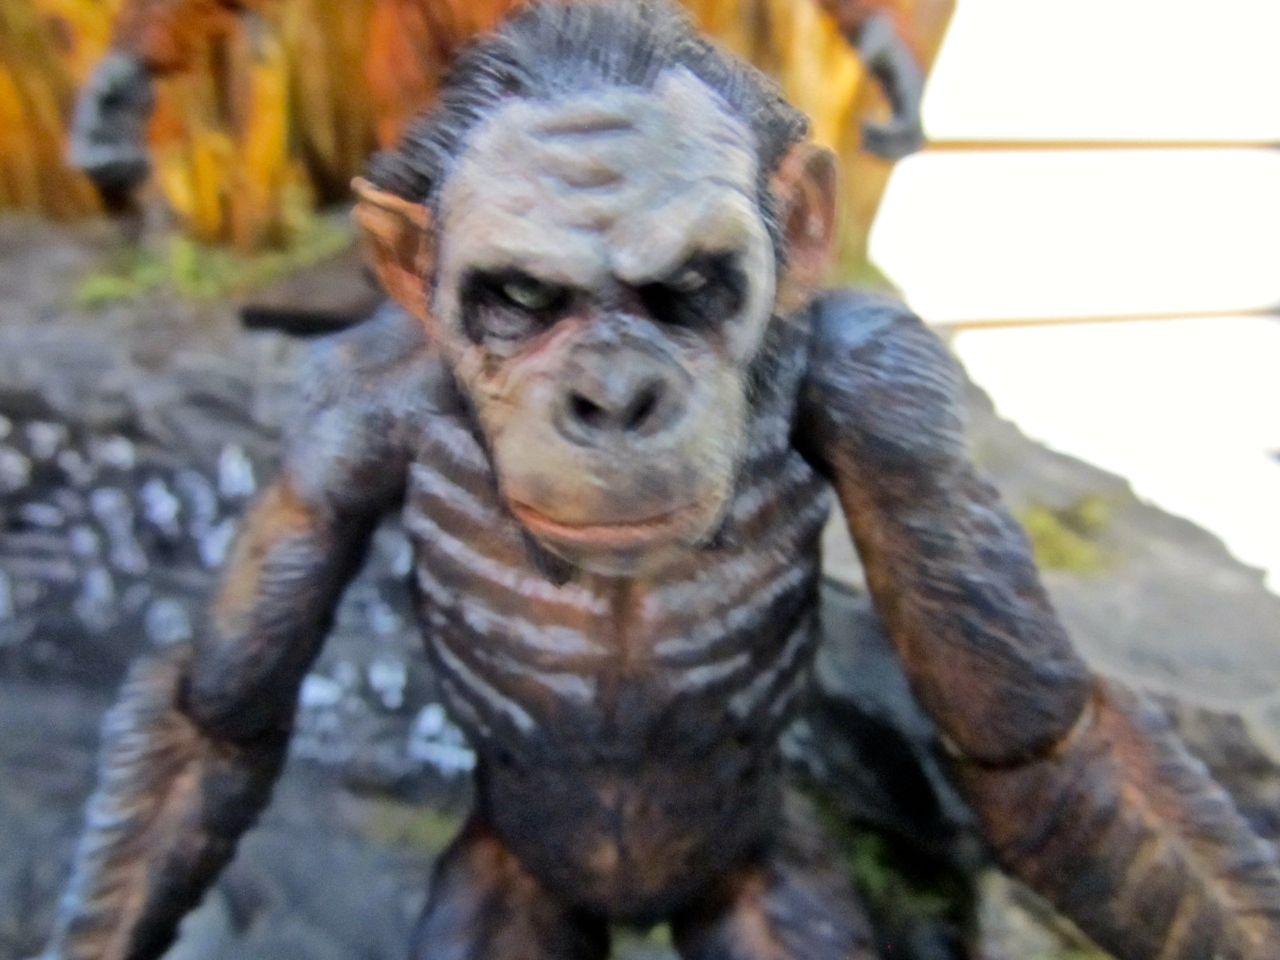 Hr_neca_dawn_of_the_planet_of_the_apes_5